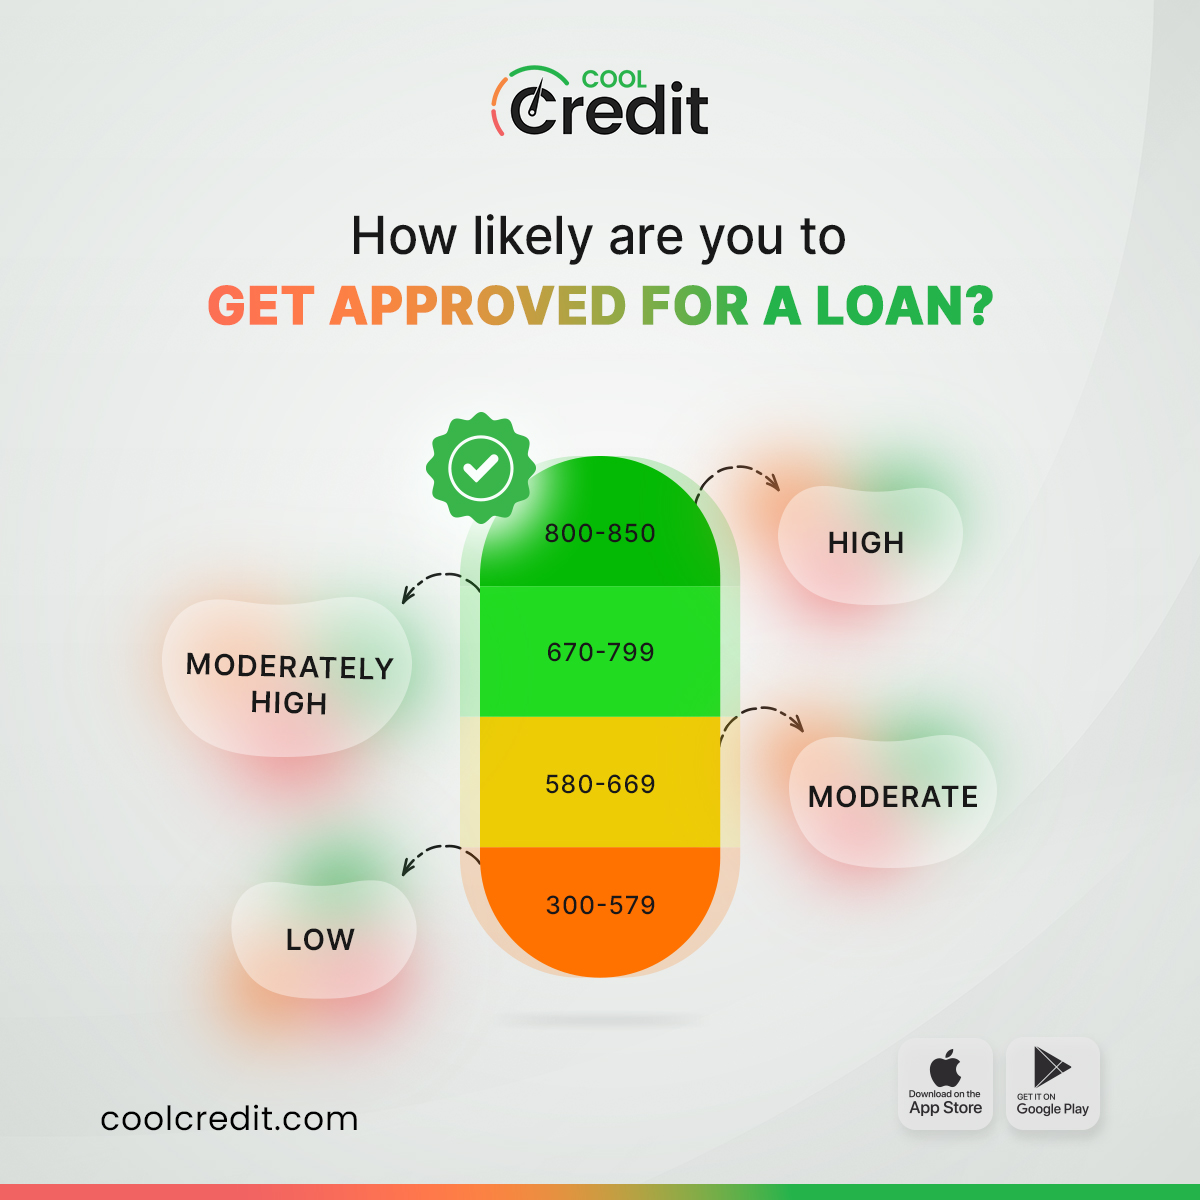 Securing #loan approval revolves around your #creditscore, a pivotal factor among various considerations.
While income and employment history matter, your credit score stands out as an indispensable sign of financial trustworthiness.